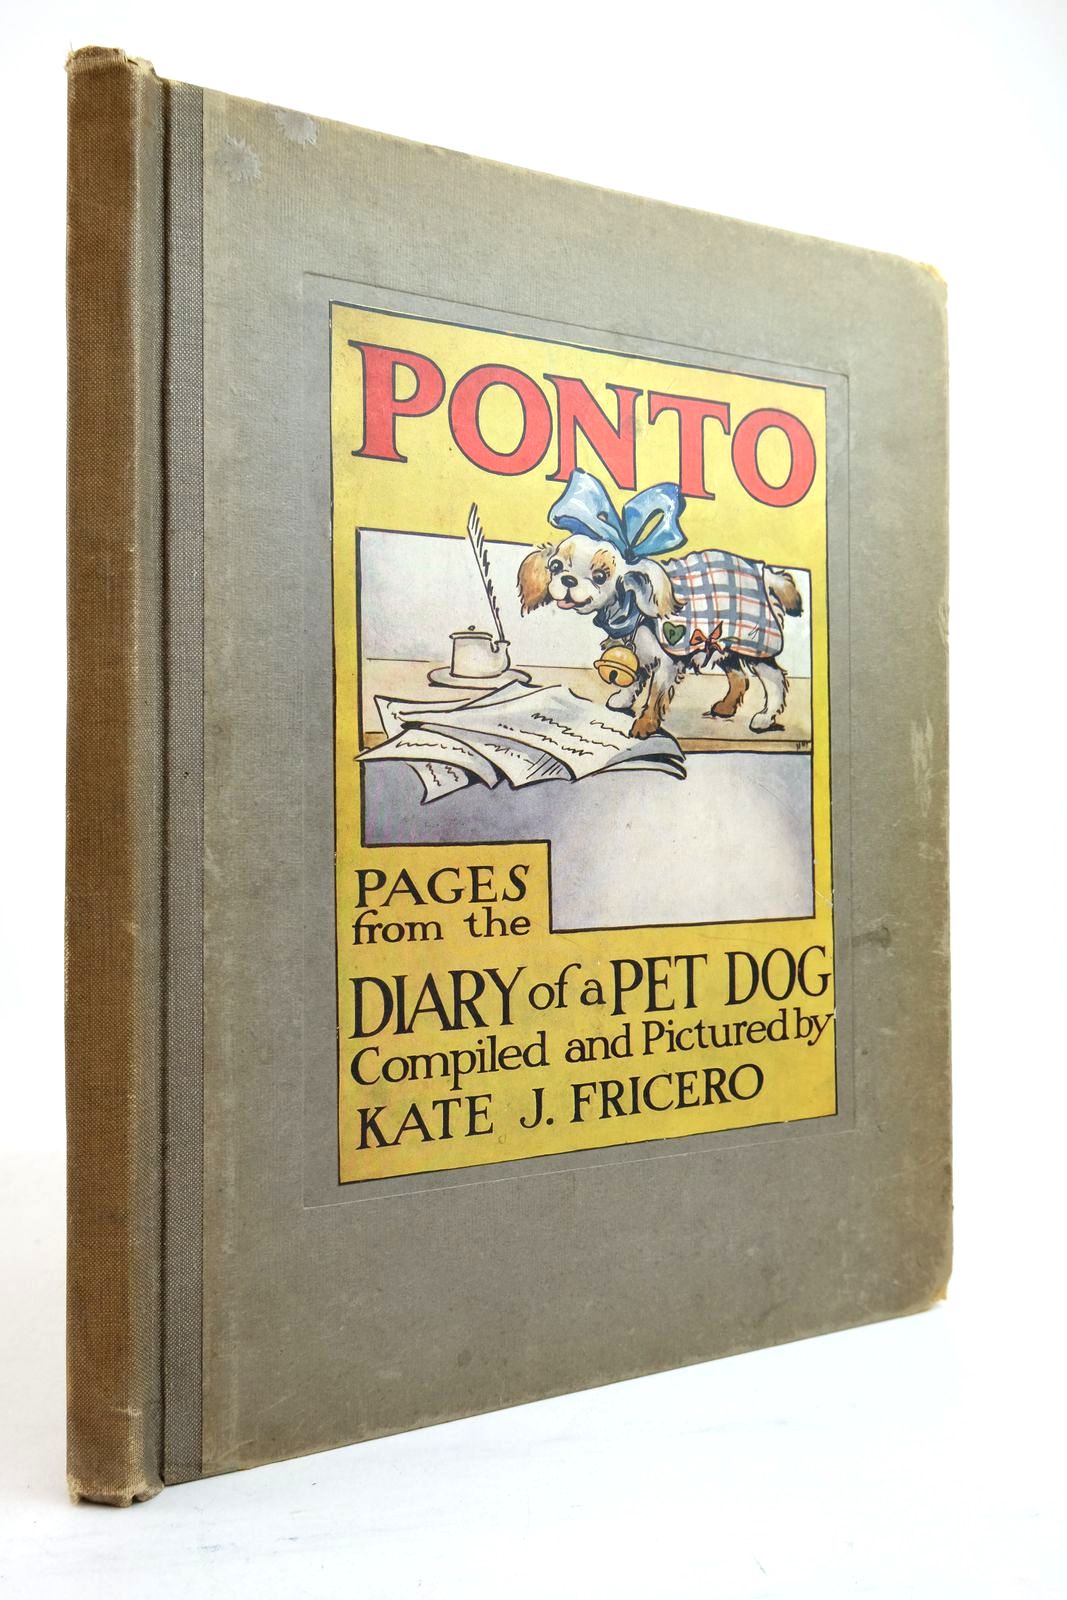 Photo of PONTO PAGES FROM THE DIARY OF A PET DOG- Stock Number: 2134713